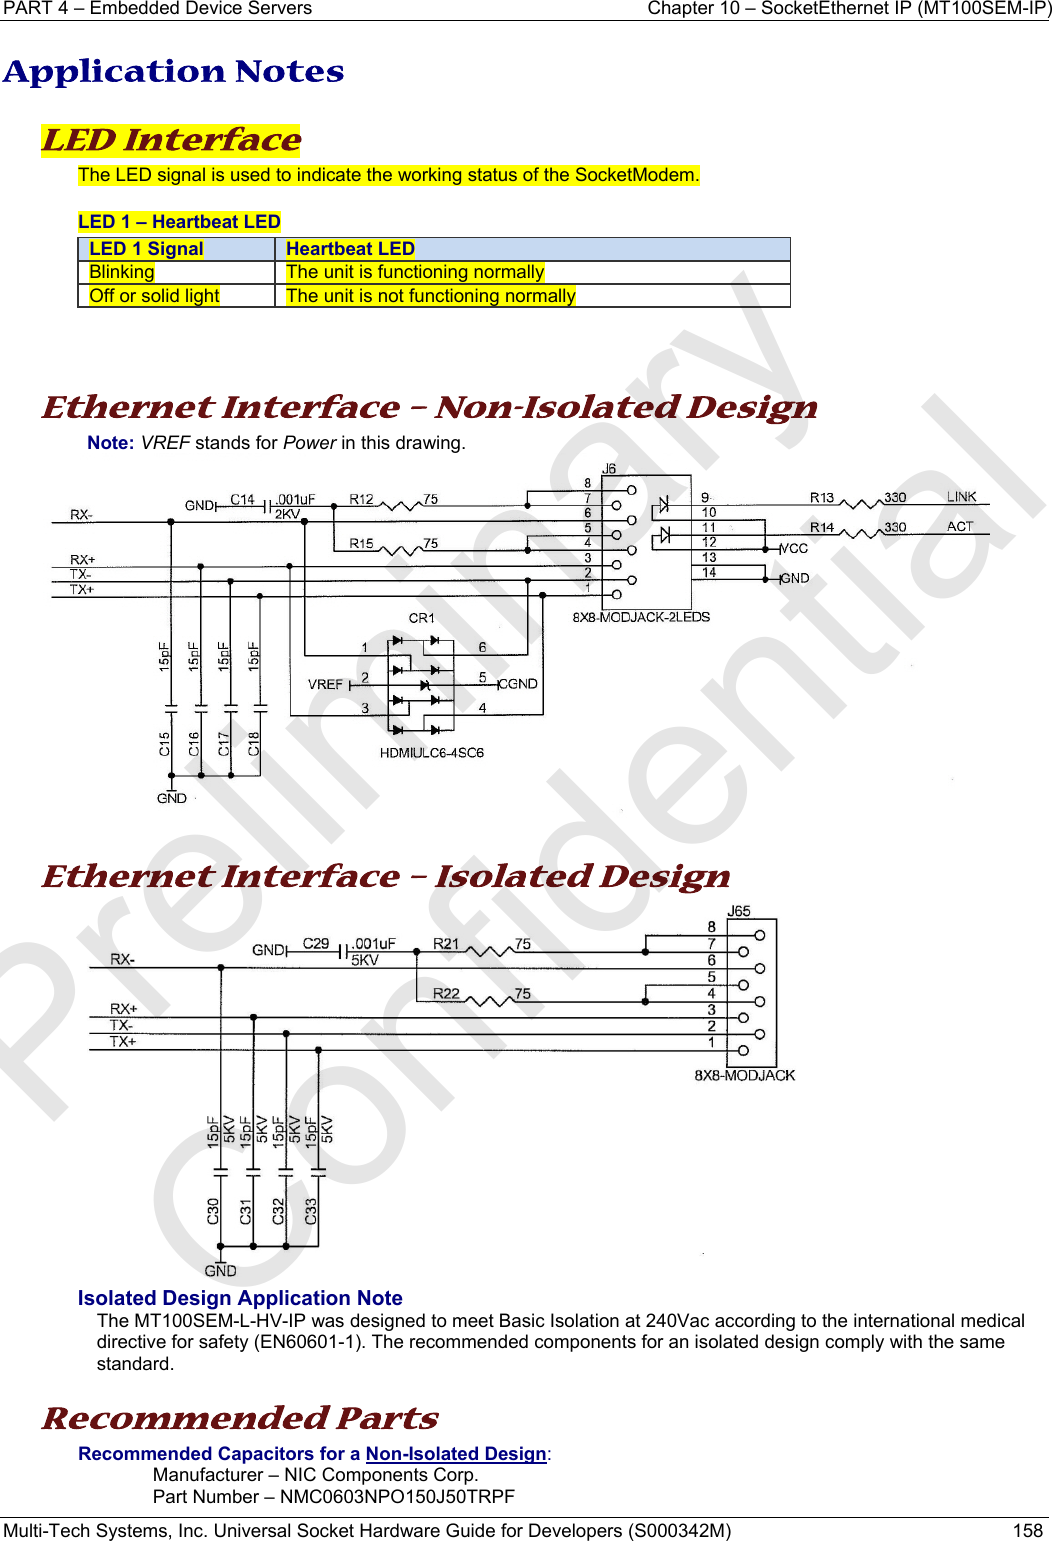 PART 4 – Embedded Device Servers  Chapter 10 – SocketEthernet IP (MT100SEM-IP)  Multi-Tech Systems, Inc. Universal Socket Hardware Guide for Developers (S000342M)  158  Application Notes  LED Interface  The LED signal is used to indicate the working status of the SocketModem.  LED 1 – Heartbeat LED LED 1 Signal  Heartbeat LEDBlinking  The unit is functioning normally Off or solid light  The unit is not functioning normally    Ethernet Interface – Non-Isolated Design Note: VREF stands for Power in this drawing.    Ethernet Interface – Isolated Design  Isolated Design Application Note The MT100SEM-L-HV-IP was designed to meet Basic Isolation at 240Vac according to the international medical directive for safety (EN60601-1). The recommended components for an isolated design comply with the same standard.   Recommended Parts  Recommended Capacitors for a Non-Isolated Design:  Manufacturer – NIC Components Corp.  Part Number – NMC0603NPO150J50TRPF Preliminary  Confidential